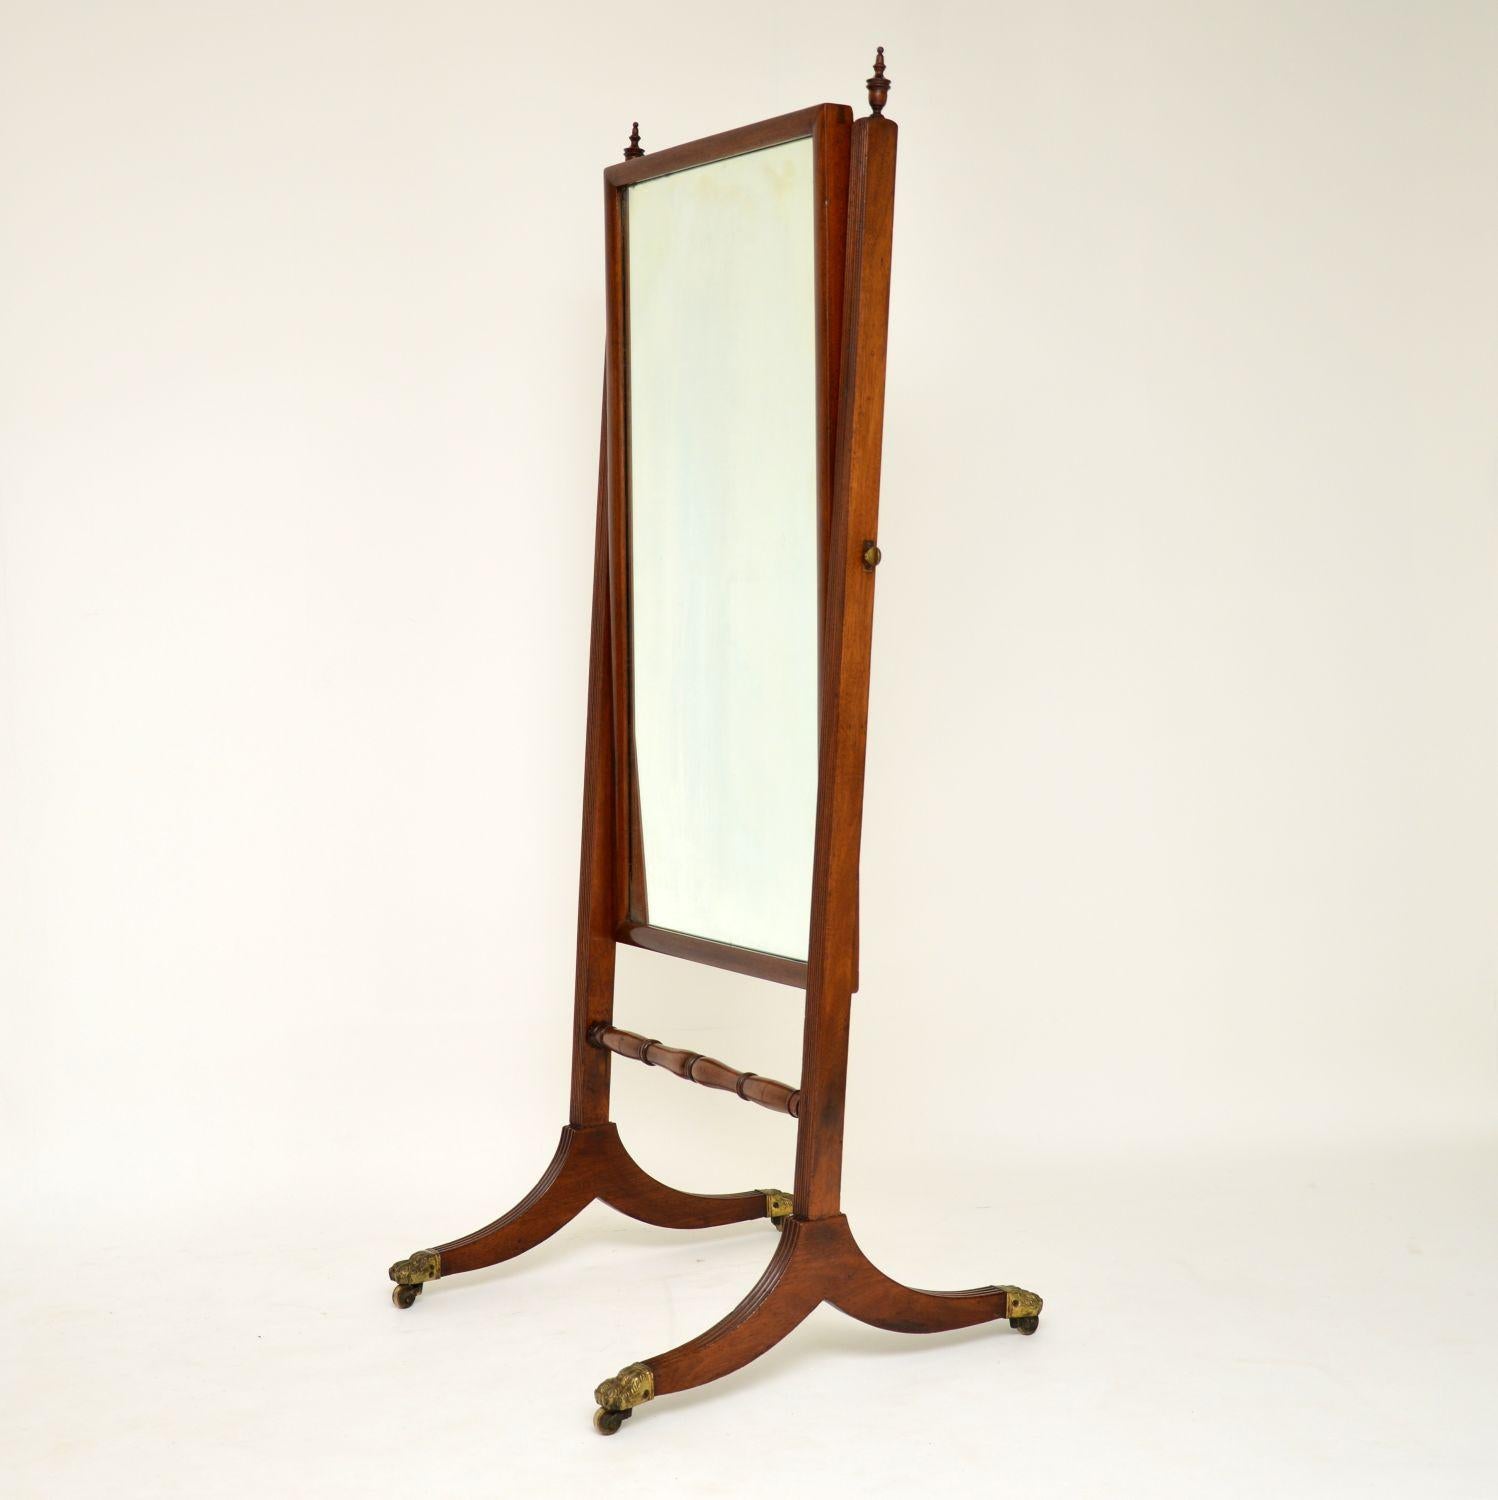 Very smart antique Regency mahogany cheval mirror in very good original condition and dating from circa 1810s-1820s period. It has reeded sides and legs, with original brass paw casters. The swing mirror can be adjusted and tighten with brass